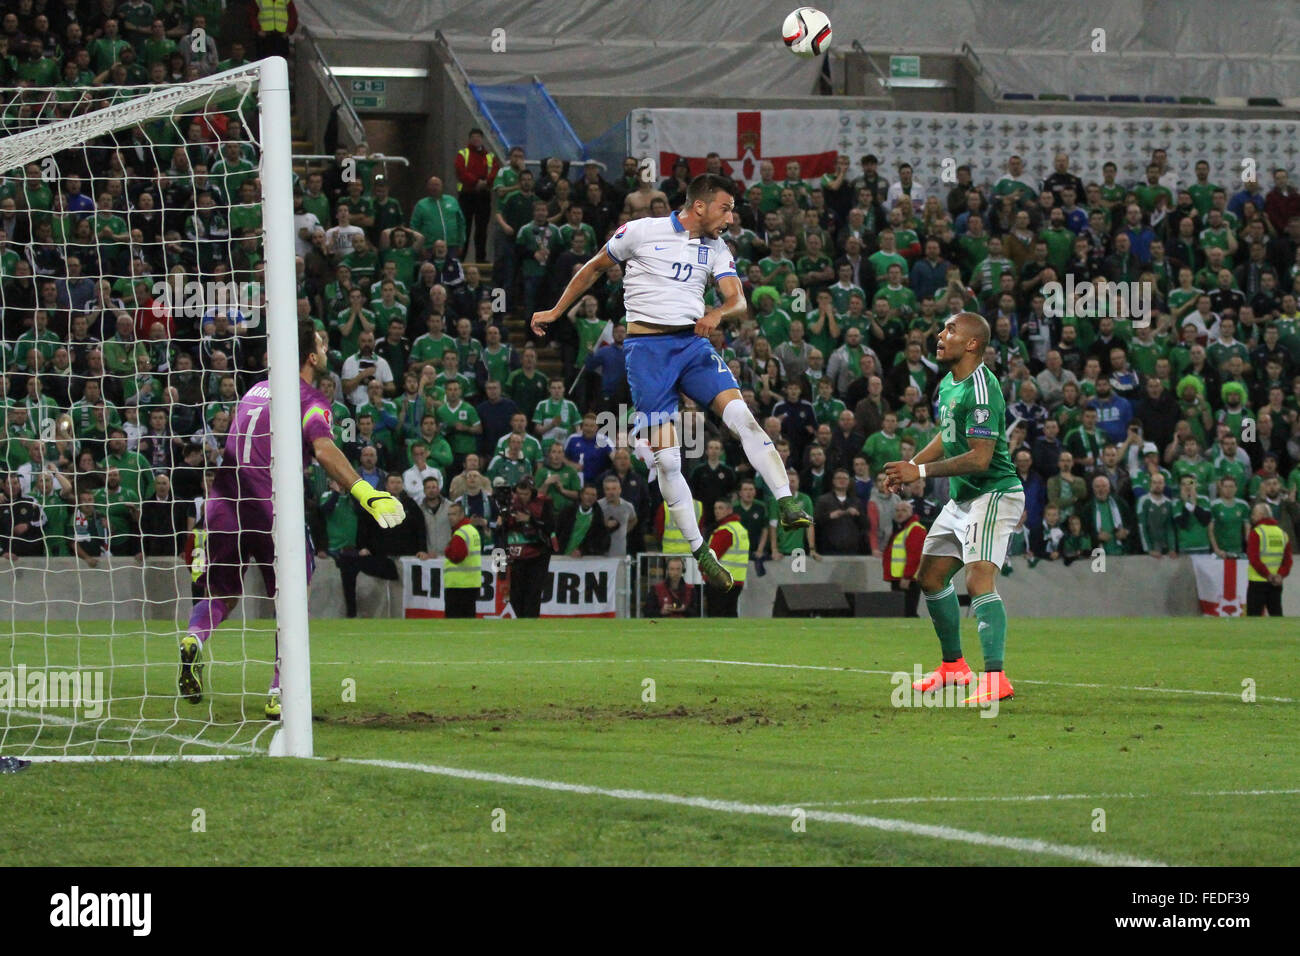 08 Oct 2015 - Euro 2016 Qualifier - Group F - Northern Ireland 3 Greece 1. Greece's Andreas Samaris (22) heads clear. Stock Photo